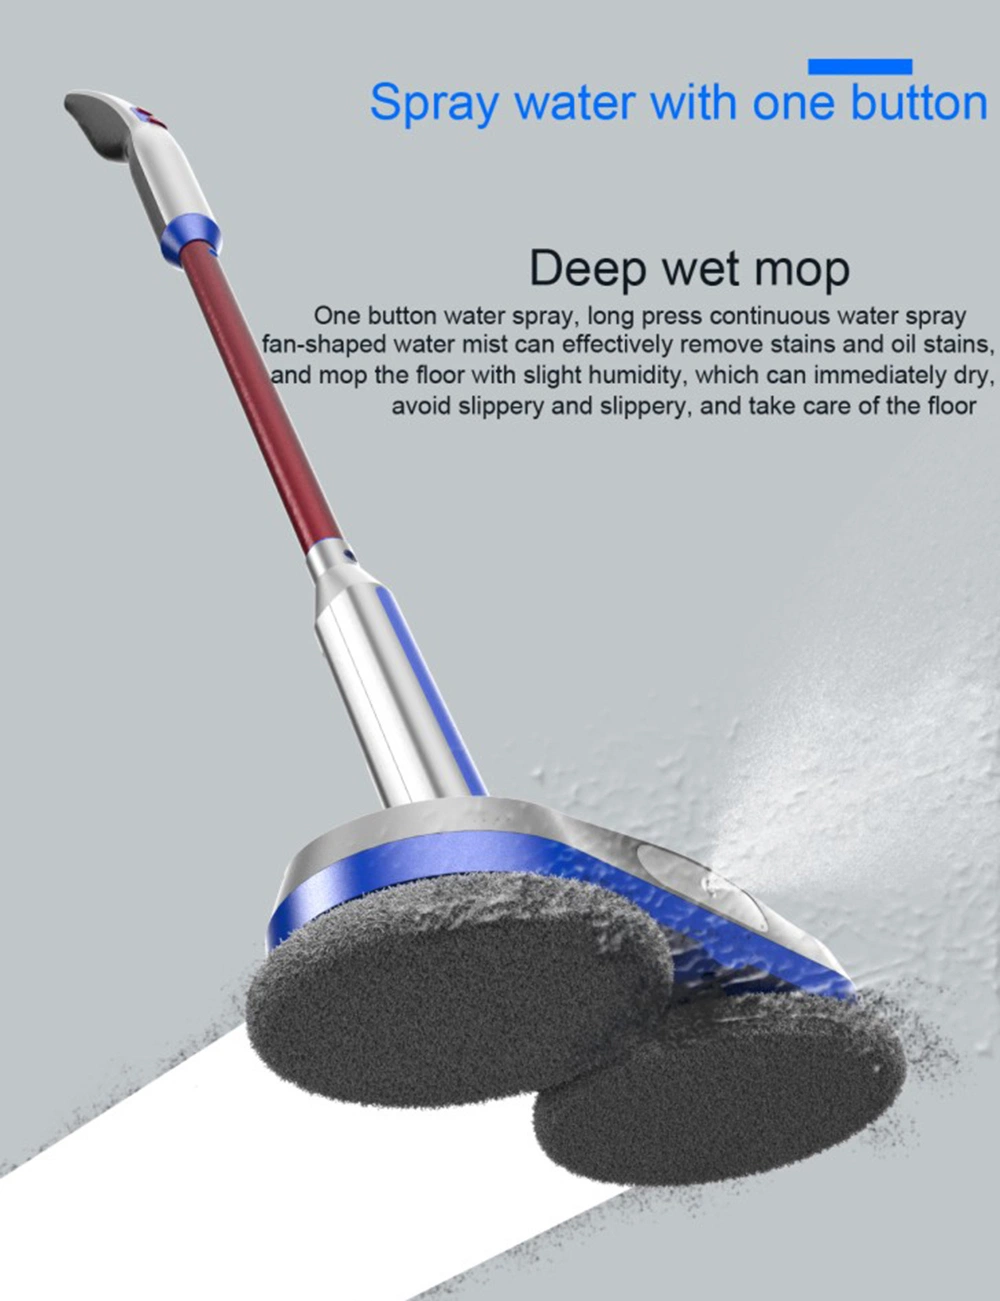 Cordless Electric Spin Mop, Spray Mop for Floor Cleaning with LED Headlight